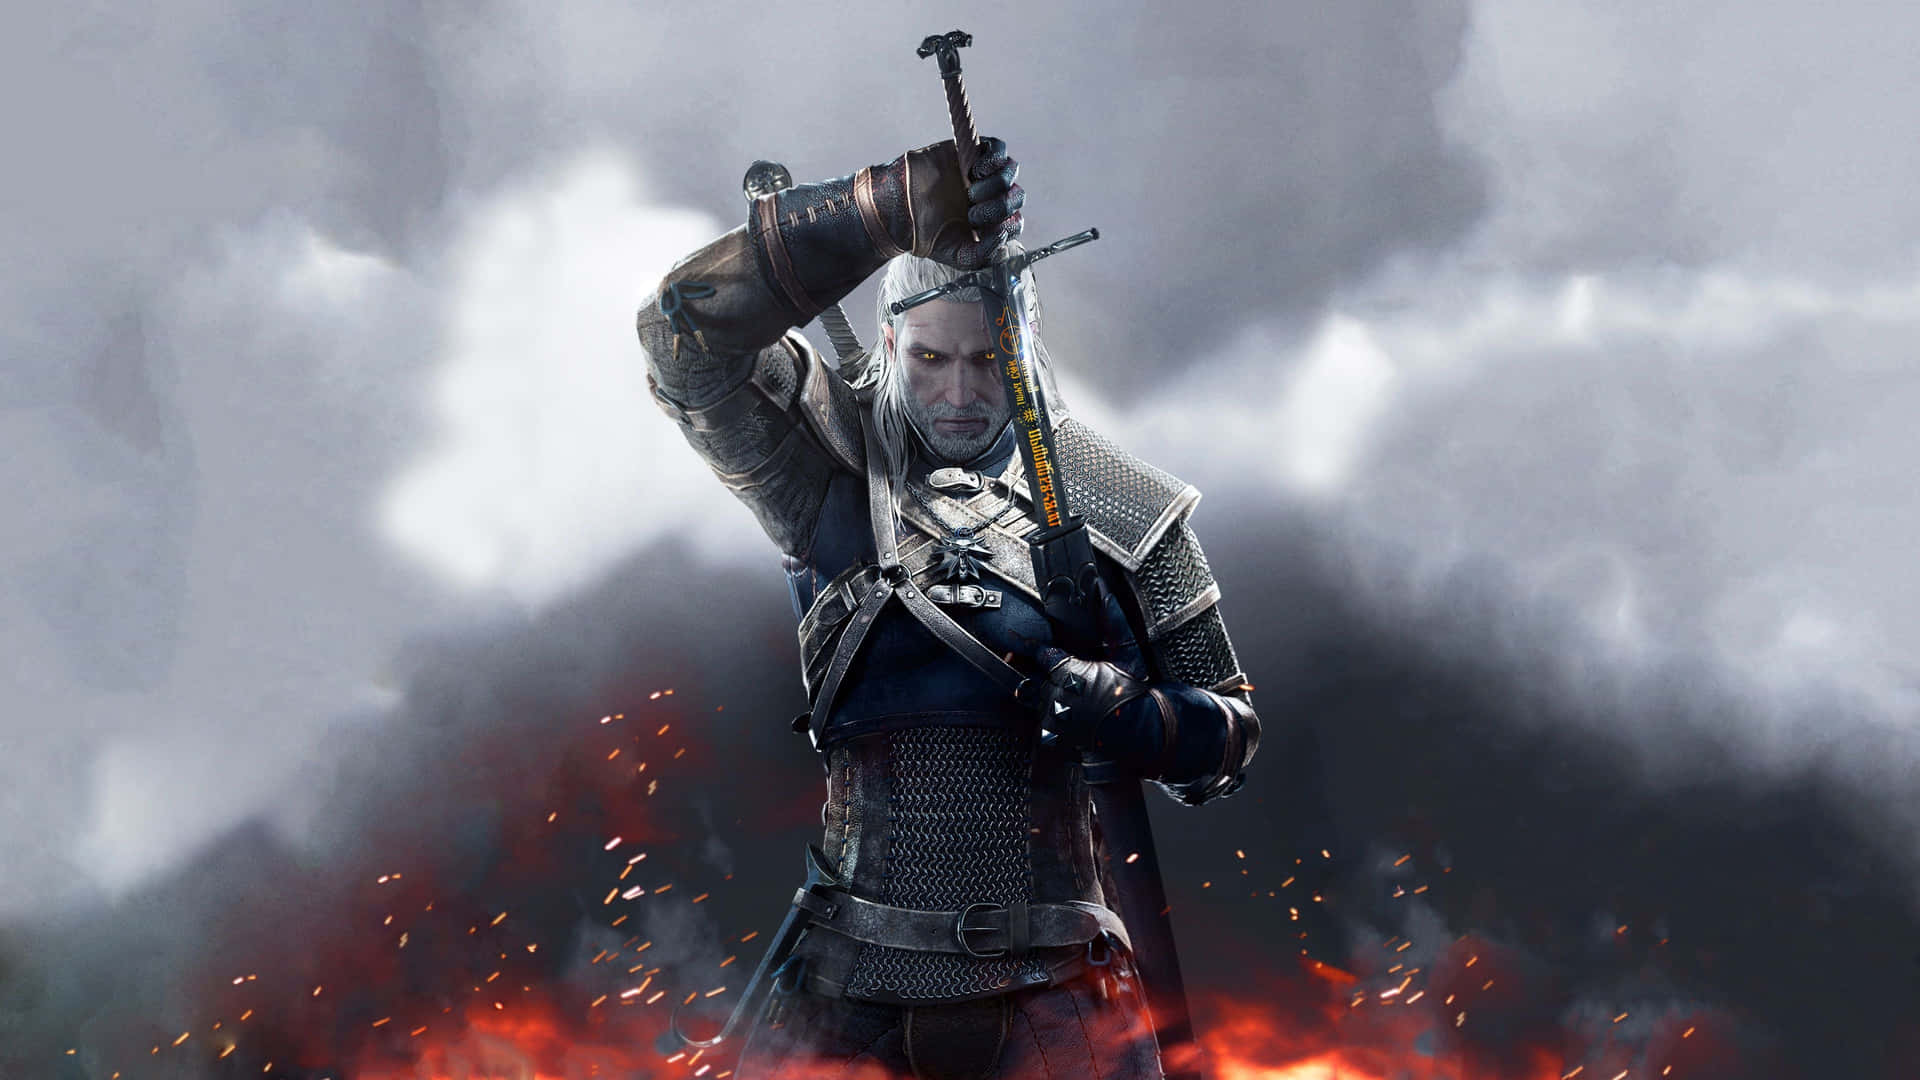 High Resolution Gaming The Witcher Geralt Of Rivia Wallpaper